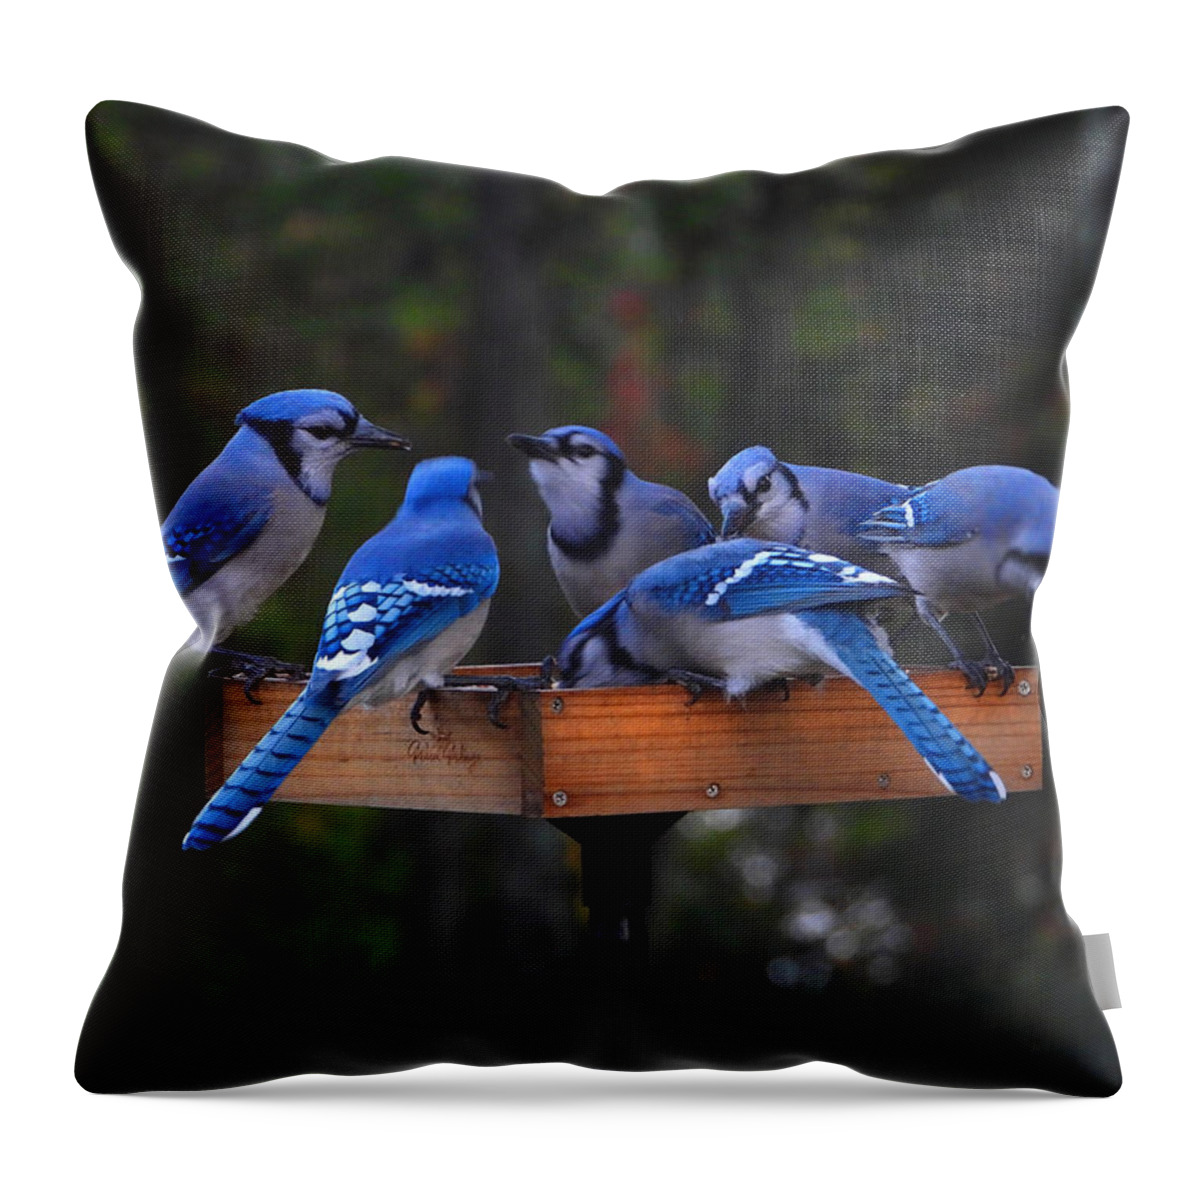 Blue Jays Throw Pillow featuring the photograph Gathering Of Blue Jays by Living Color Photography Lorraine Lynch